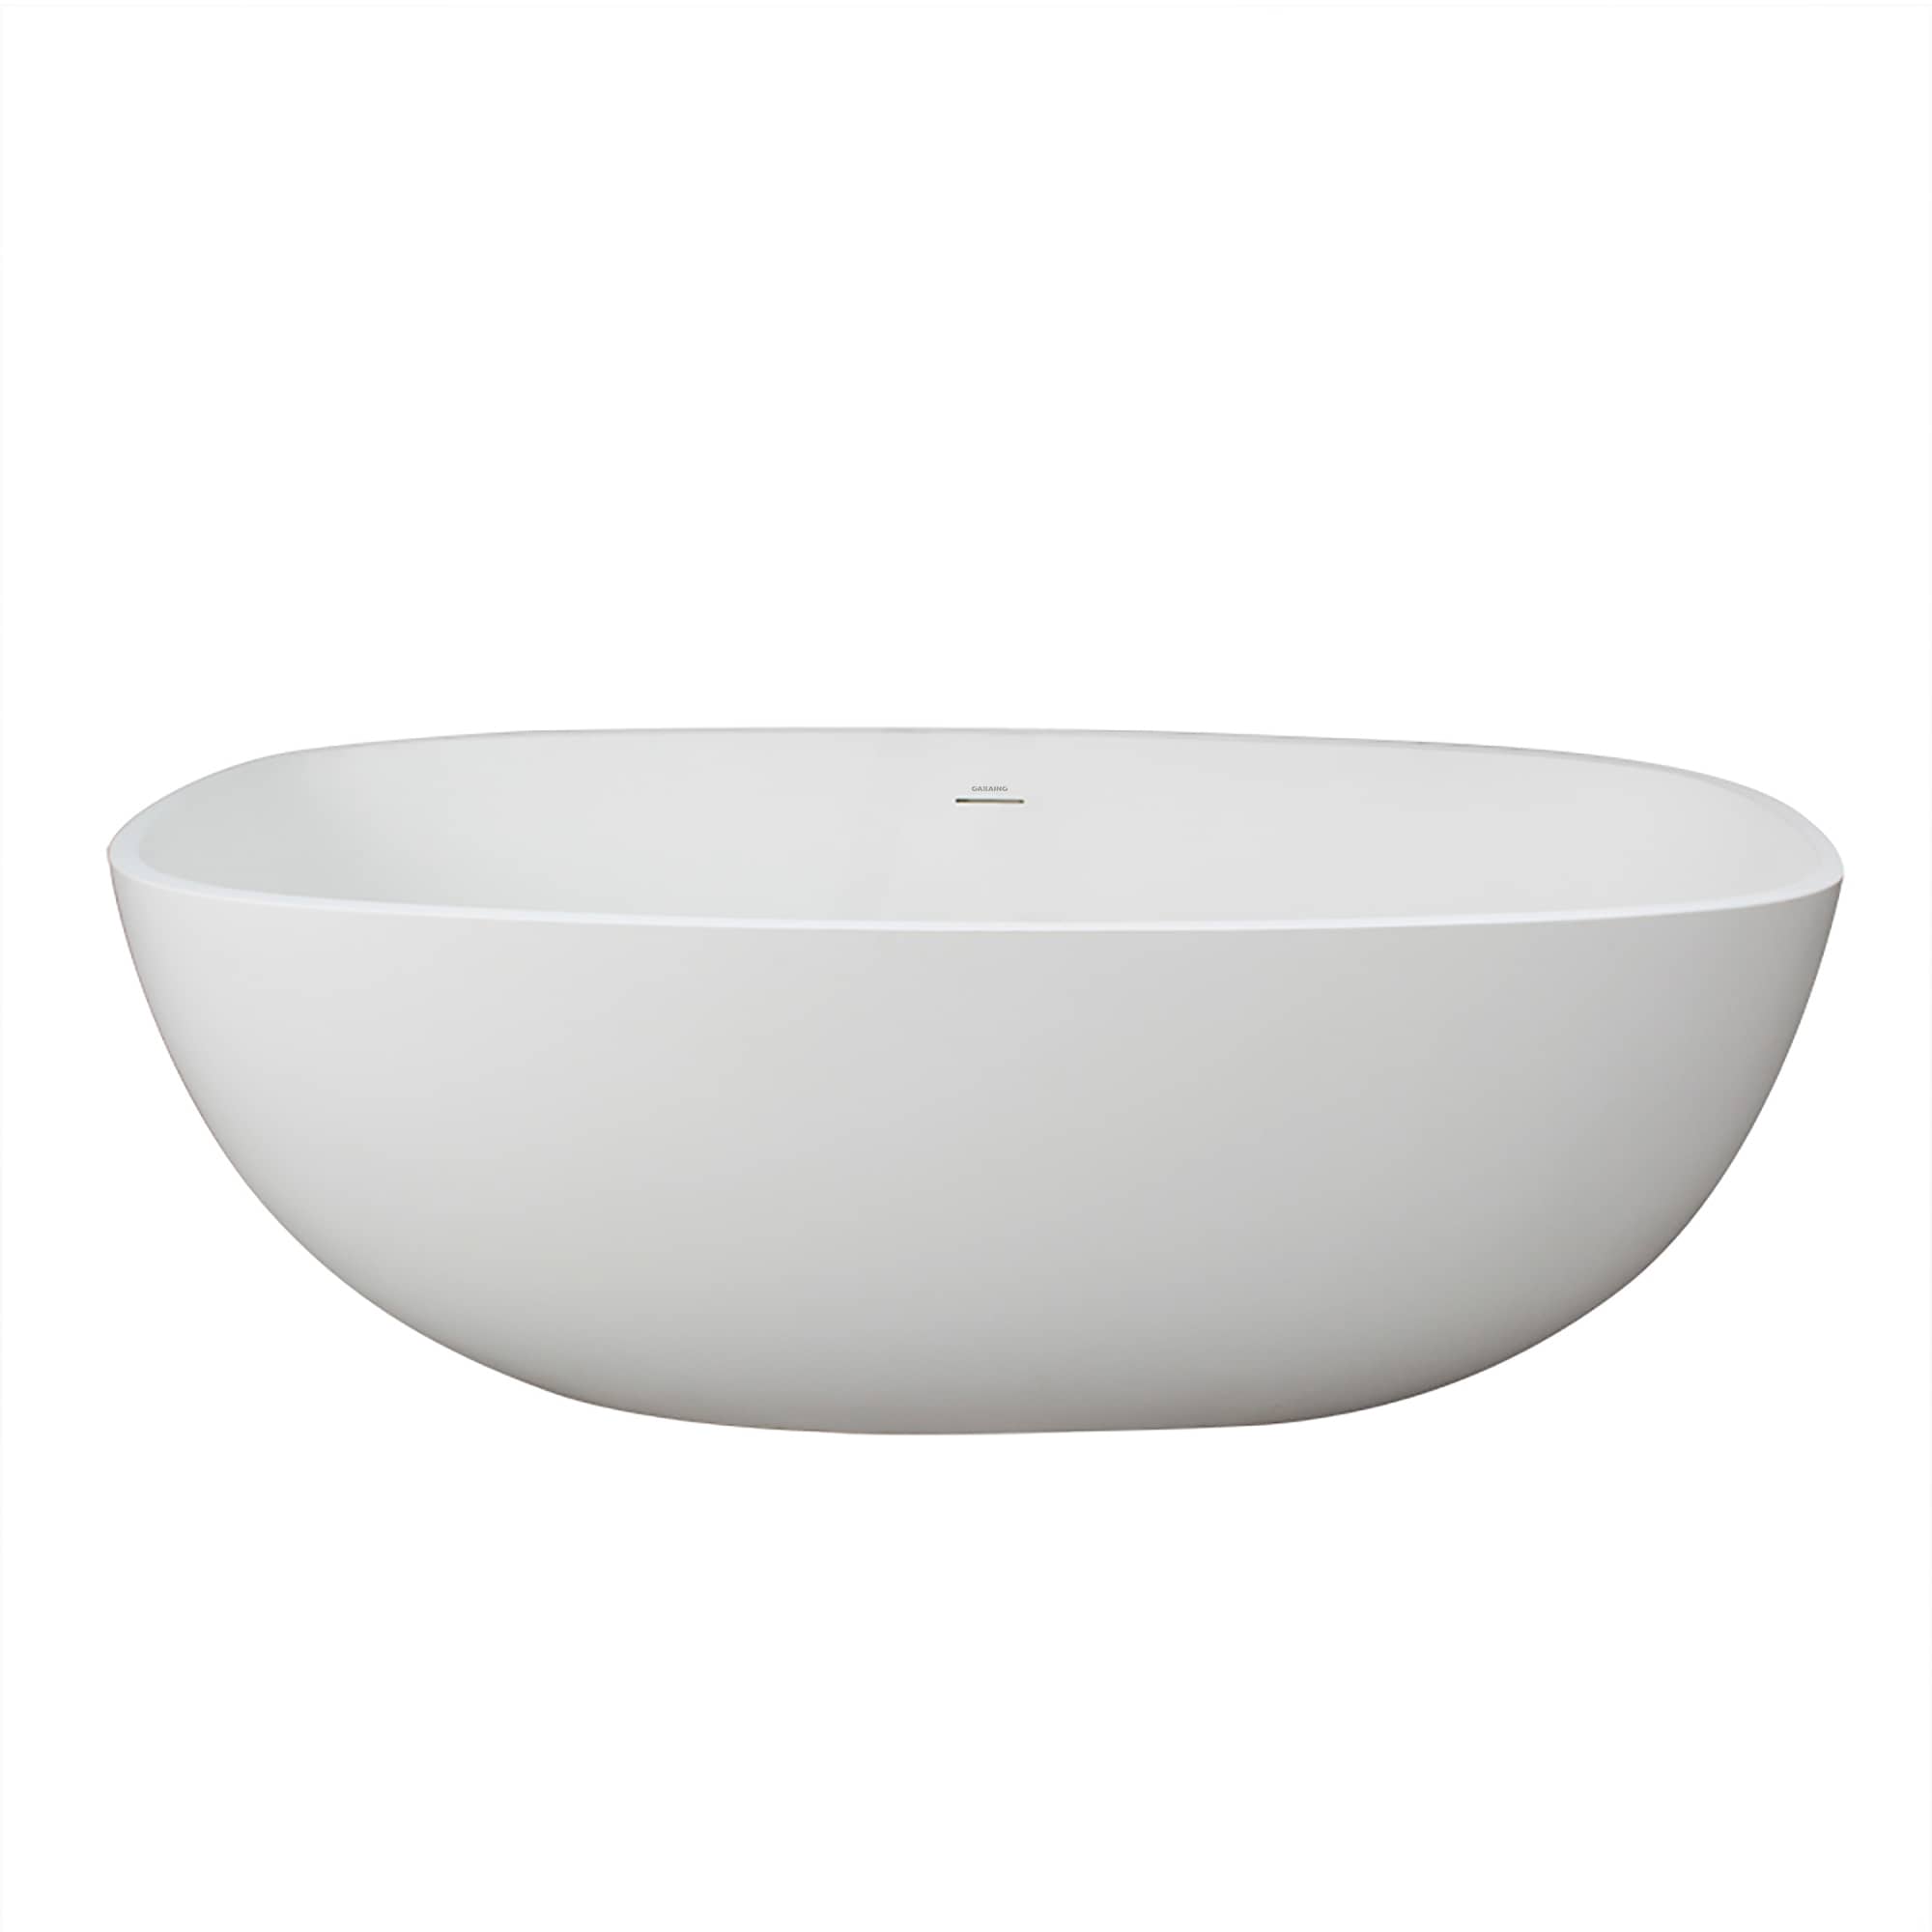 CASAINC 67 in. Solid Surface Free-Standing Bathtub with Centre Drain in Matte White